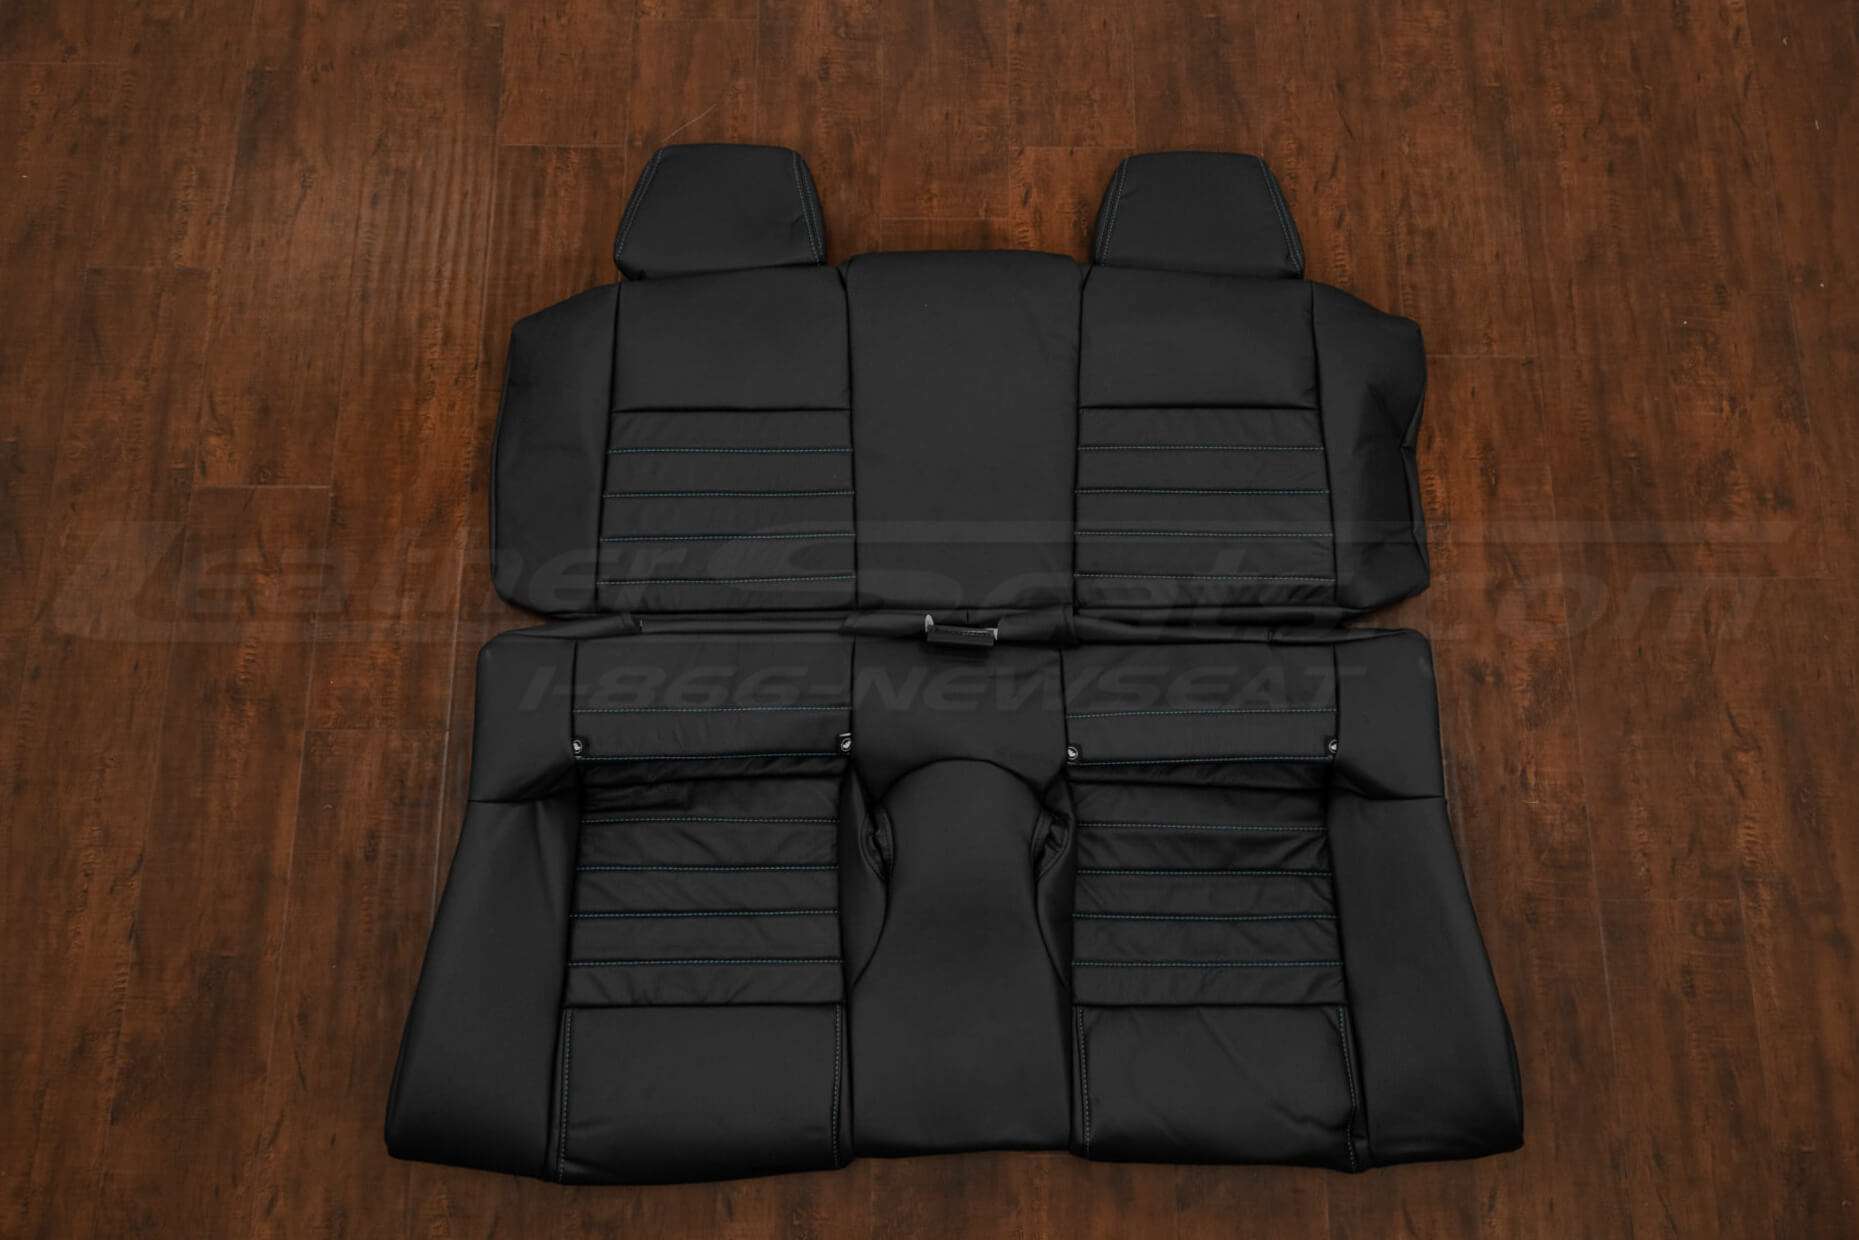 13-14 Ford Mustang Upholstery Kit - Black - Rear Seats